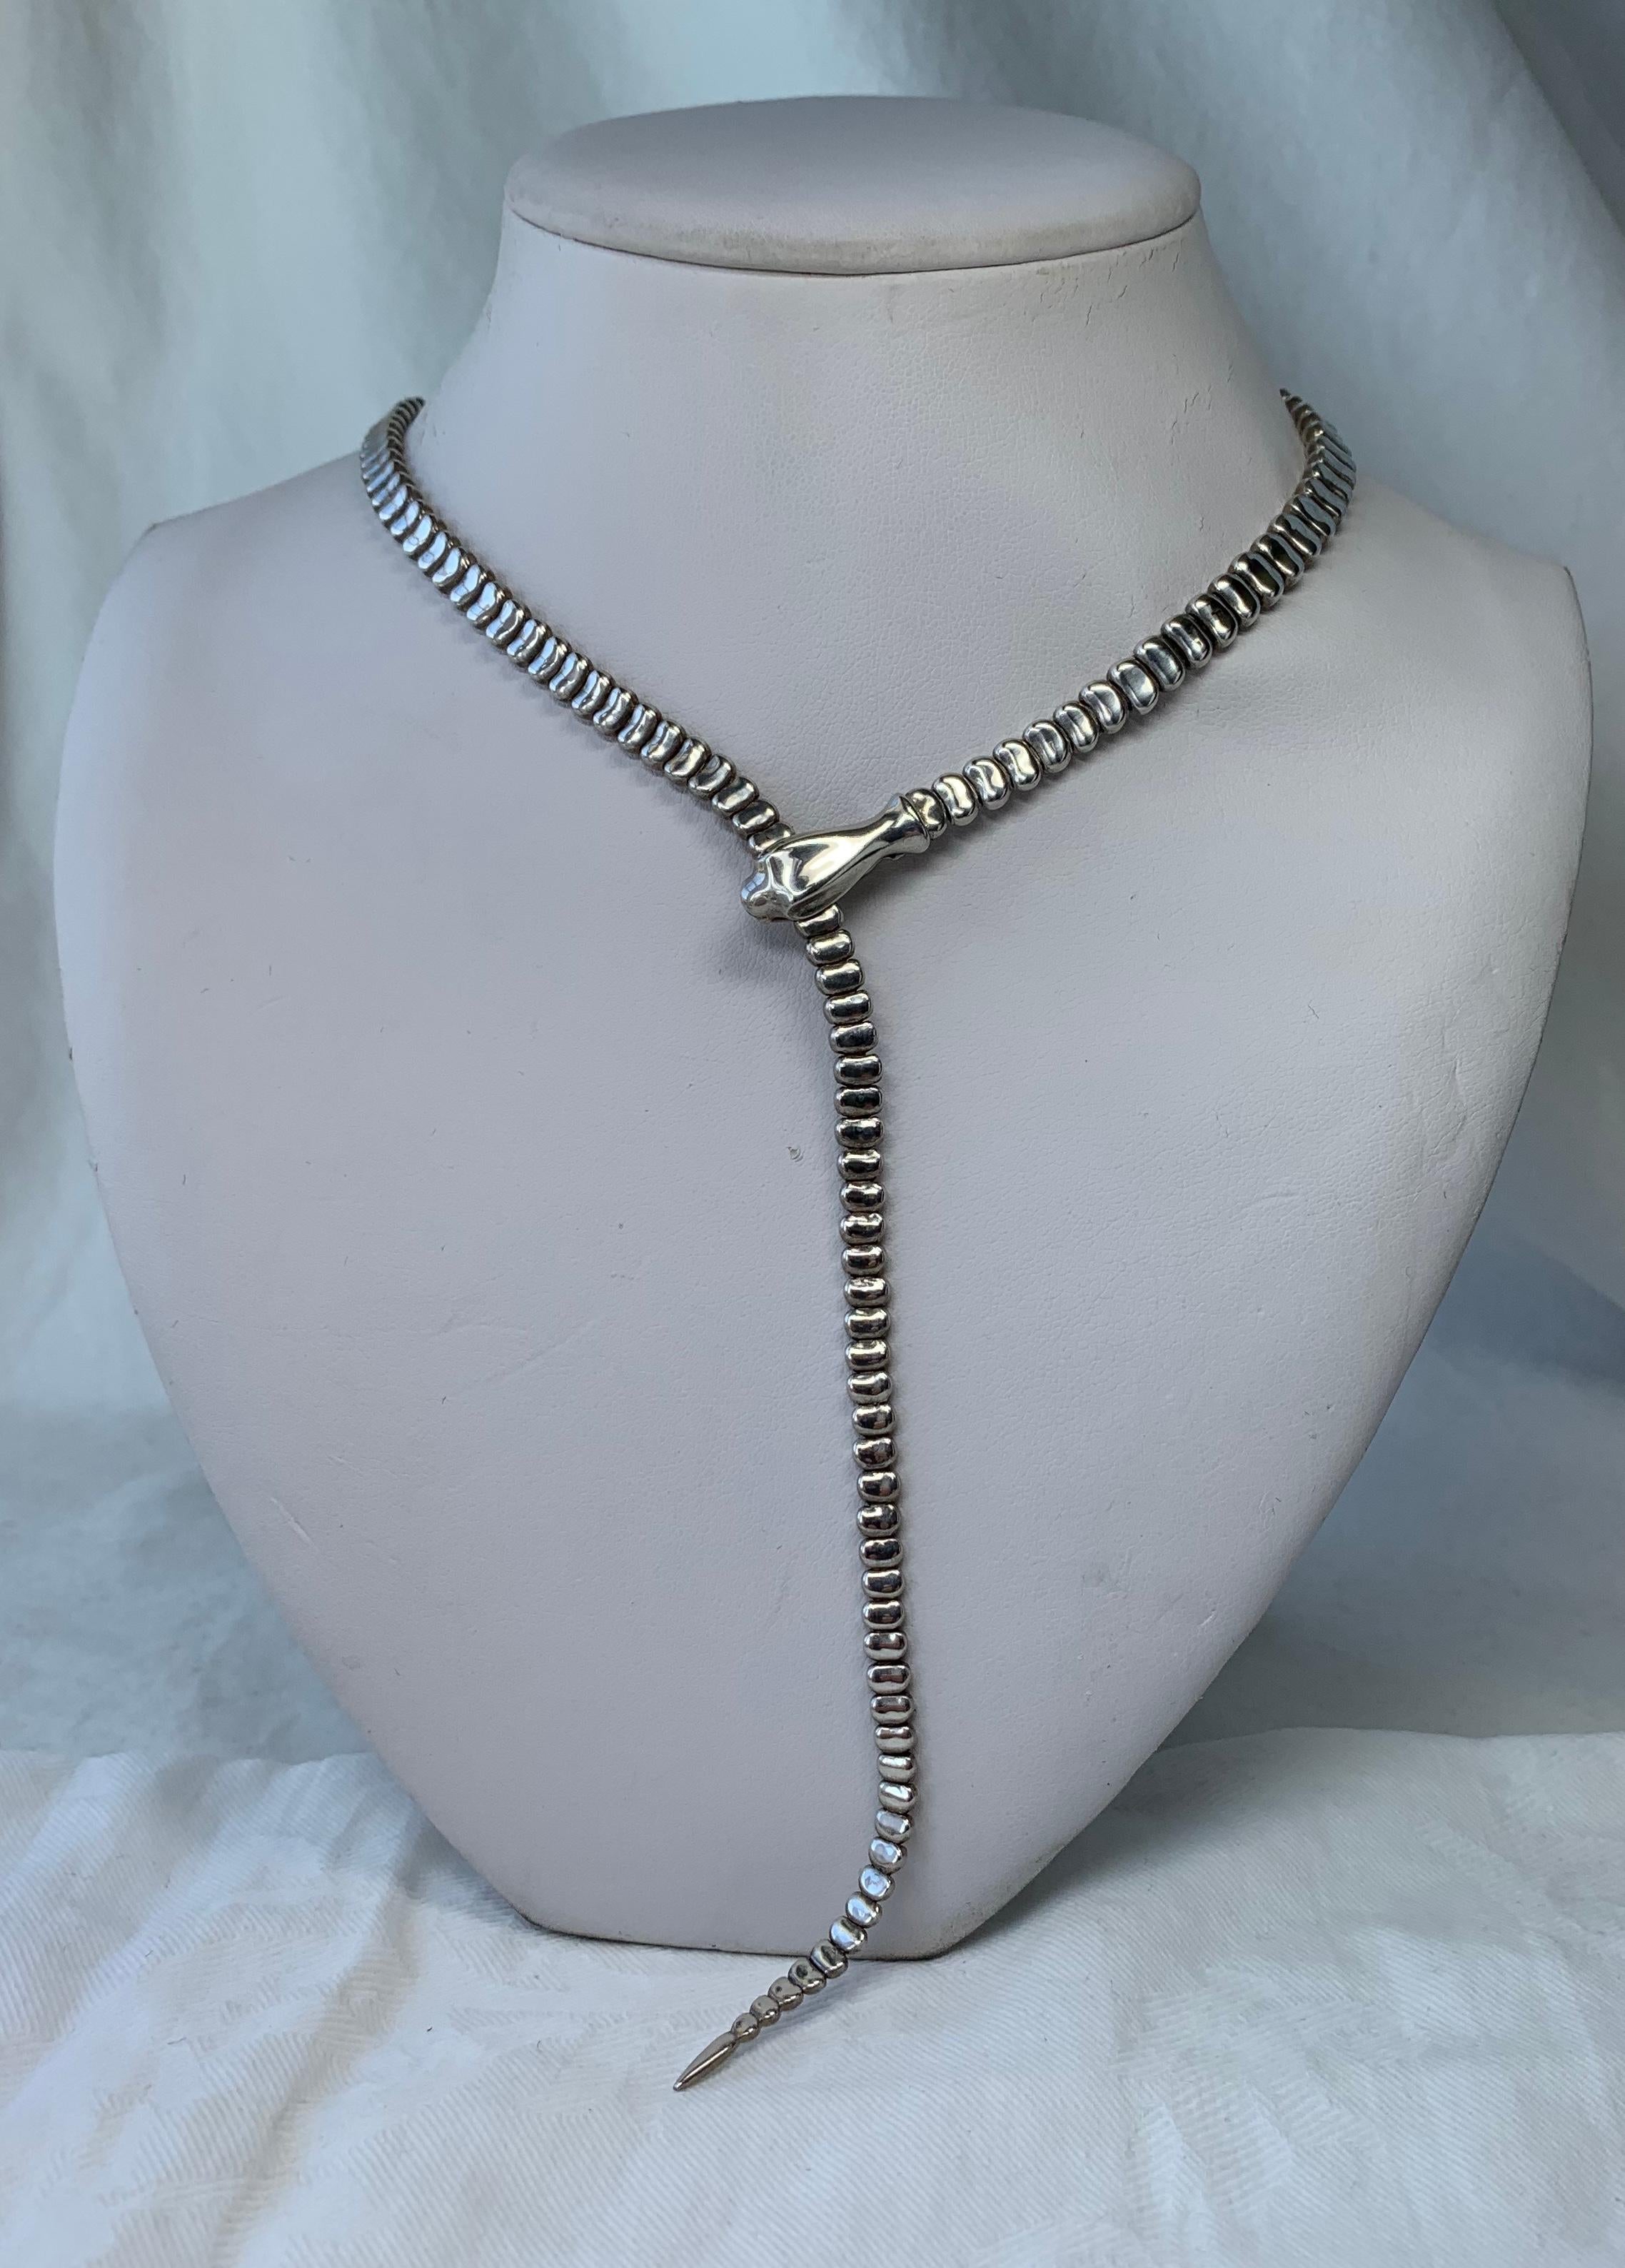 This incredible and rare Vintage (circa 1980s) serpentine snake necklace from Tiffany & Co. is one of Elsa Peretti's iconic snake designs! The necklace was originally designed by Peretti in the 1970's to accessorize the designs of Halston. Crafted